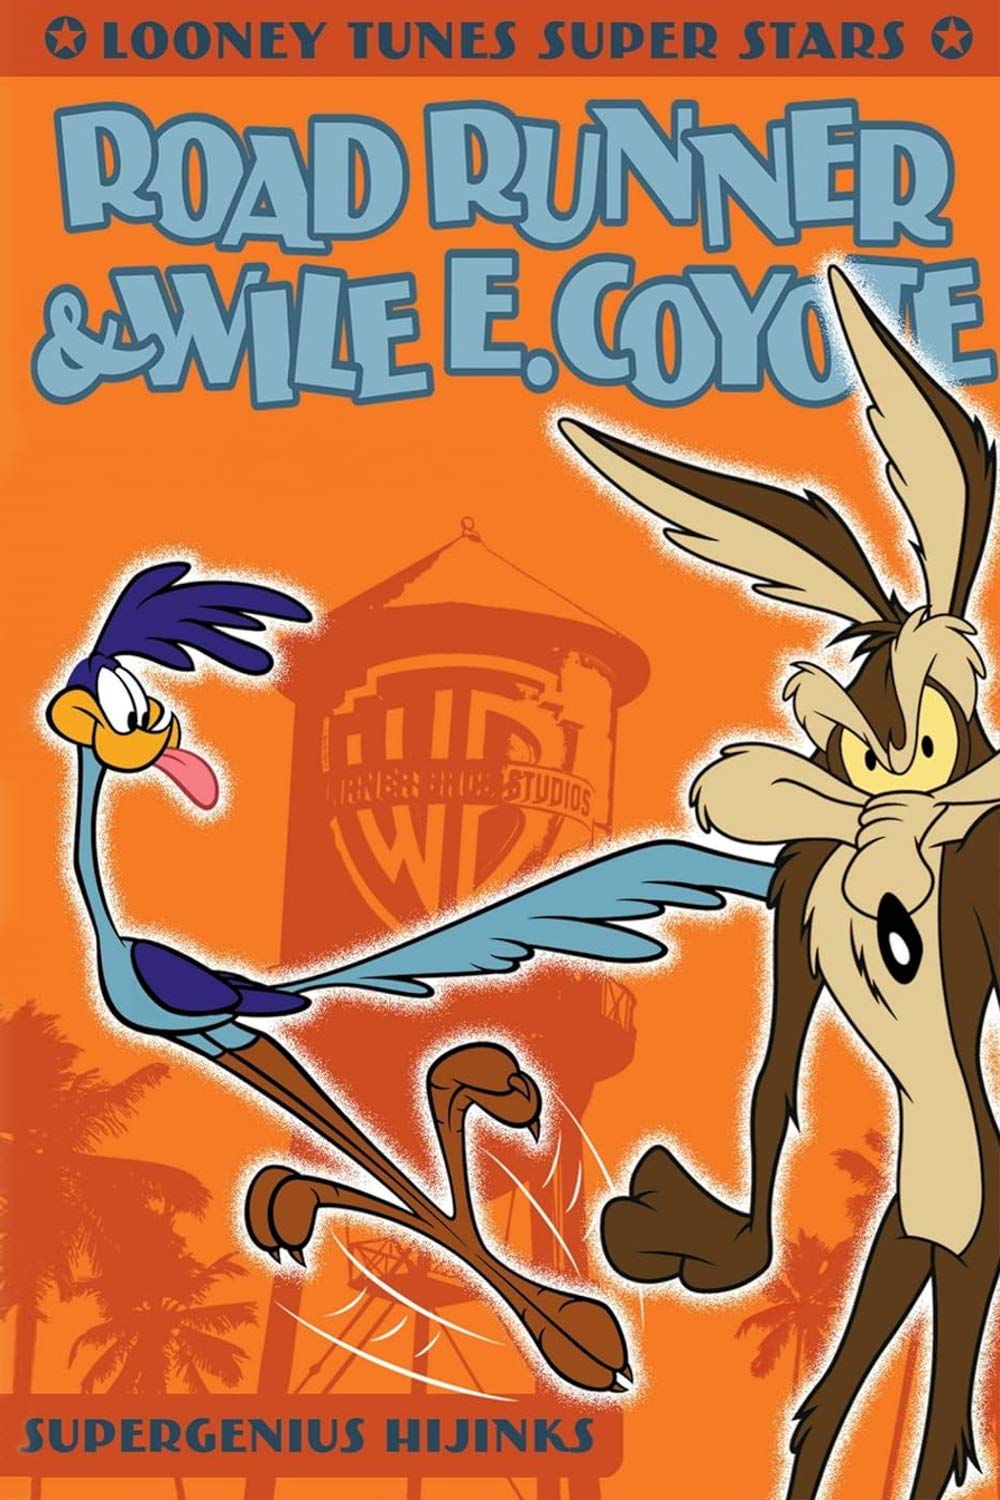 Willy il Coyote e Beep Beep